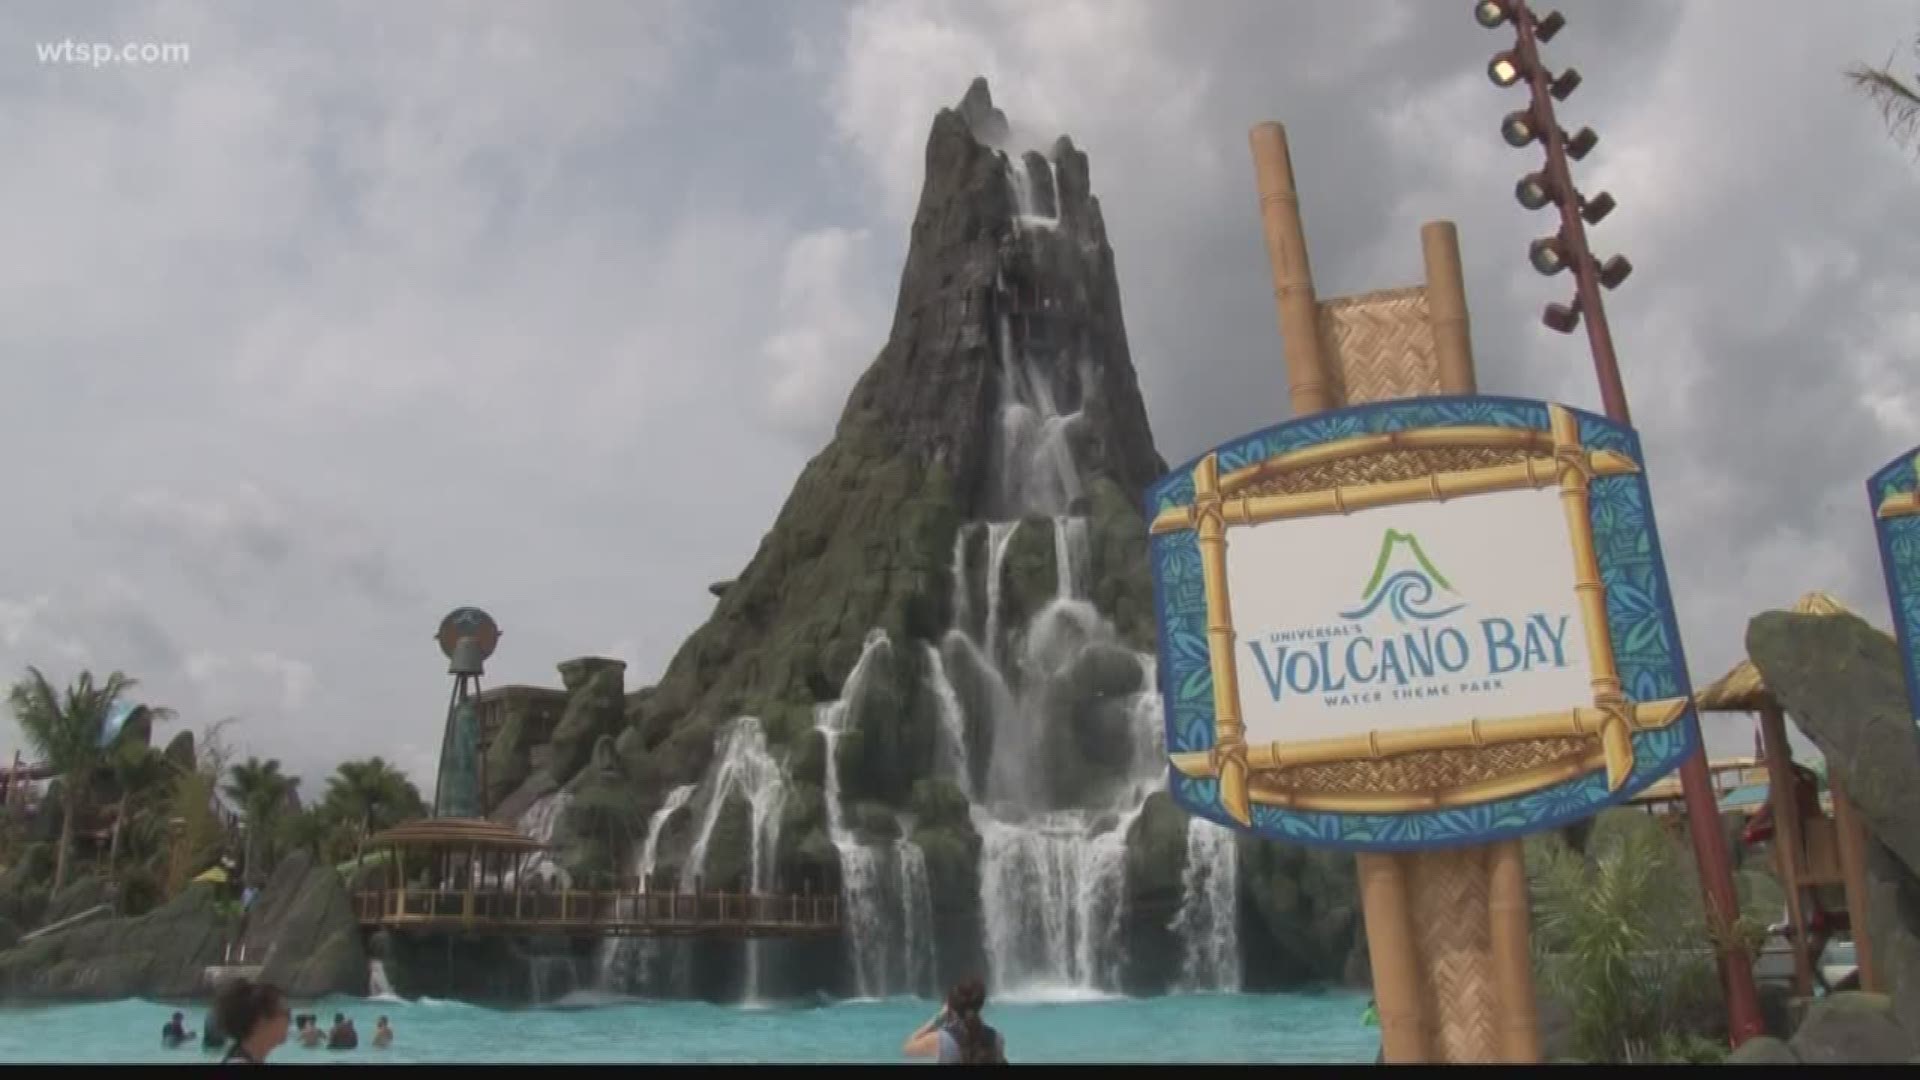 Universal Orlando’s water park opened its doors to the public for less than an hour before a visitor said something was wrong and they felt electric currents moving down their legs. 

Wendy Lee, 43, said she could feel electric currents in her legs as she stood in the lazy river at Volcano Bay.

Lee told Universal workers she had a metallic taste in her mouth and her head was humming.